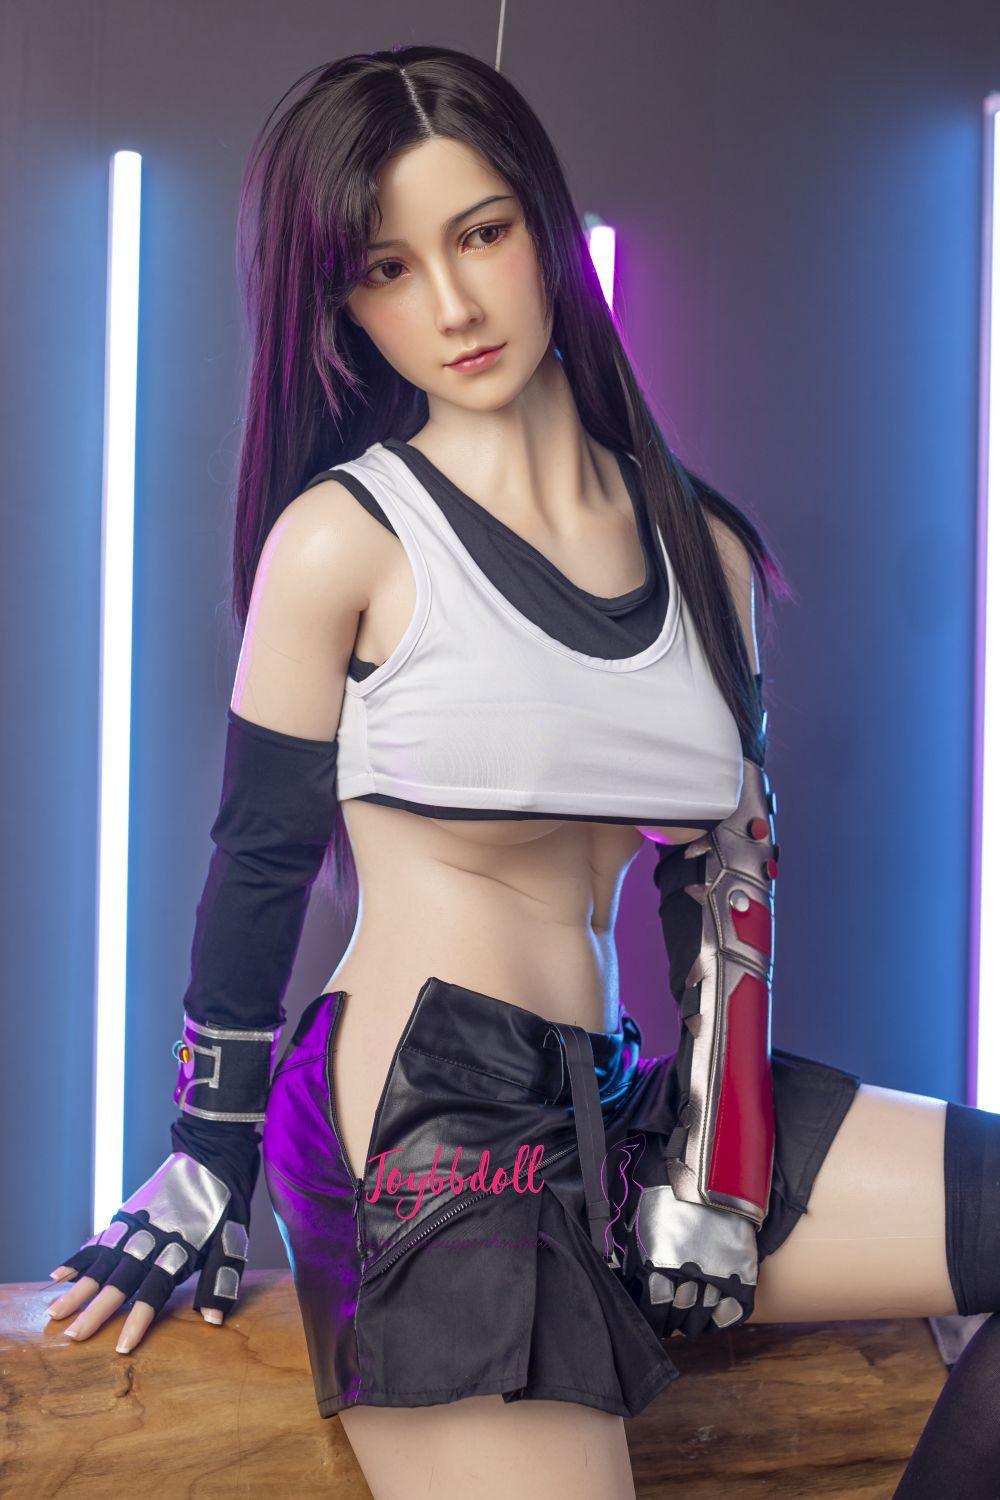 Neue Upgrade Tifa-165cm 5ft5 C Cup Cosplay Anime Final-Fantasy Sexpuppe - Joybbdoll-CST Doll